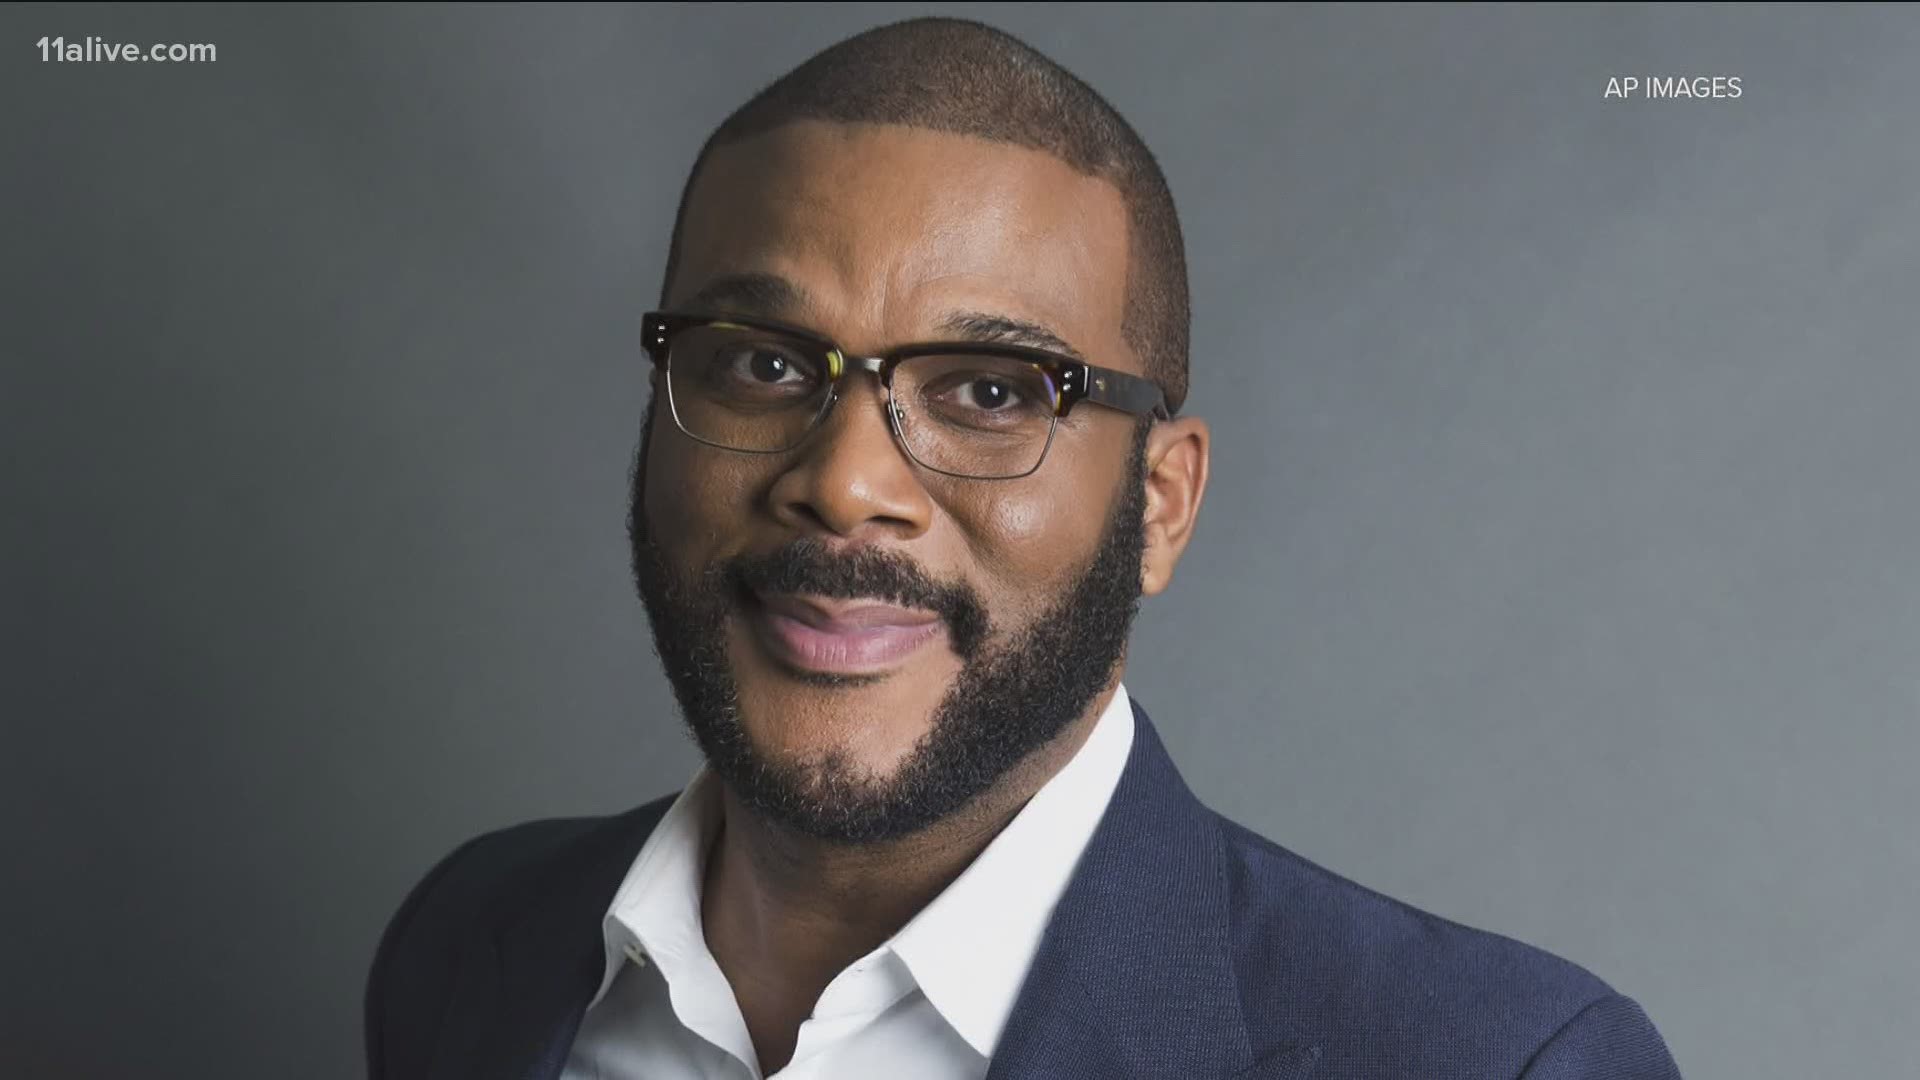 Atlanta media mogul, Tyler Perry, is set to pay for the funeral of a young girl shot and killed over a violent holiday weekend.